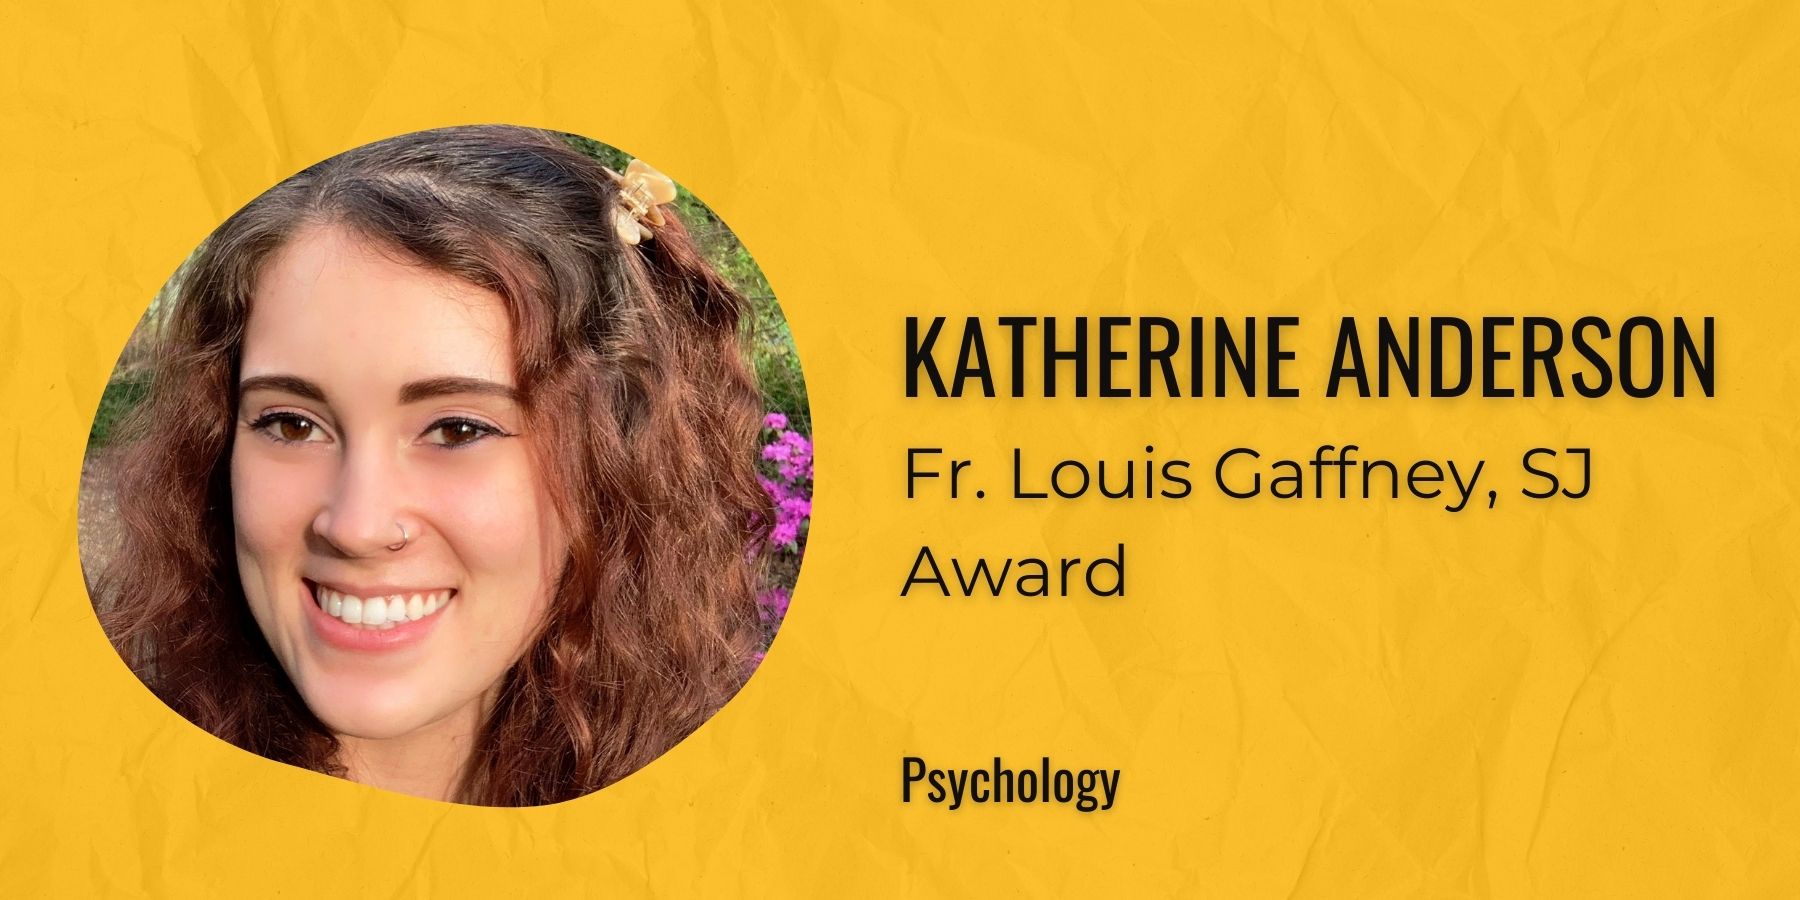 Image of Katherine Anderson with text: Fr. Louis Gaffney, SJ Award, Psychology
